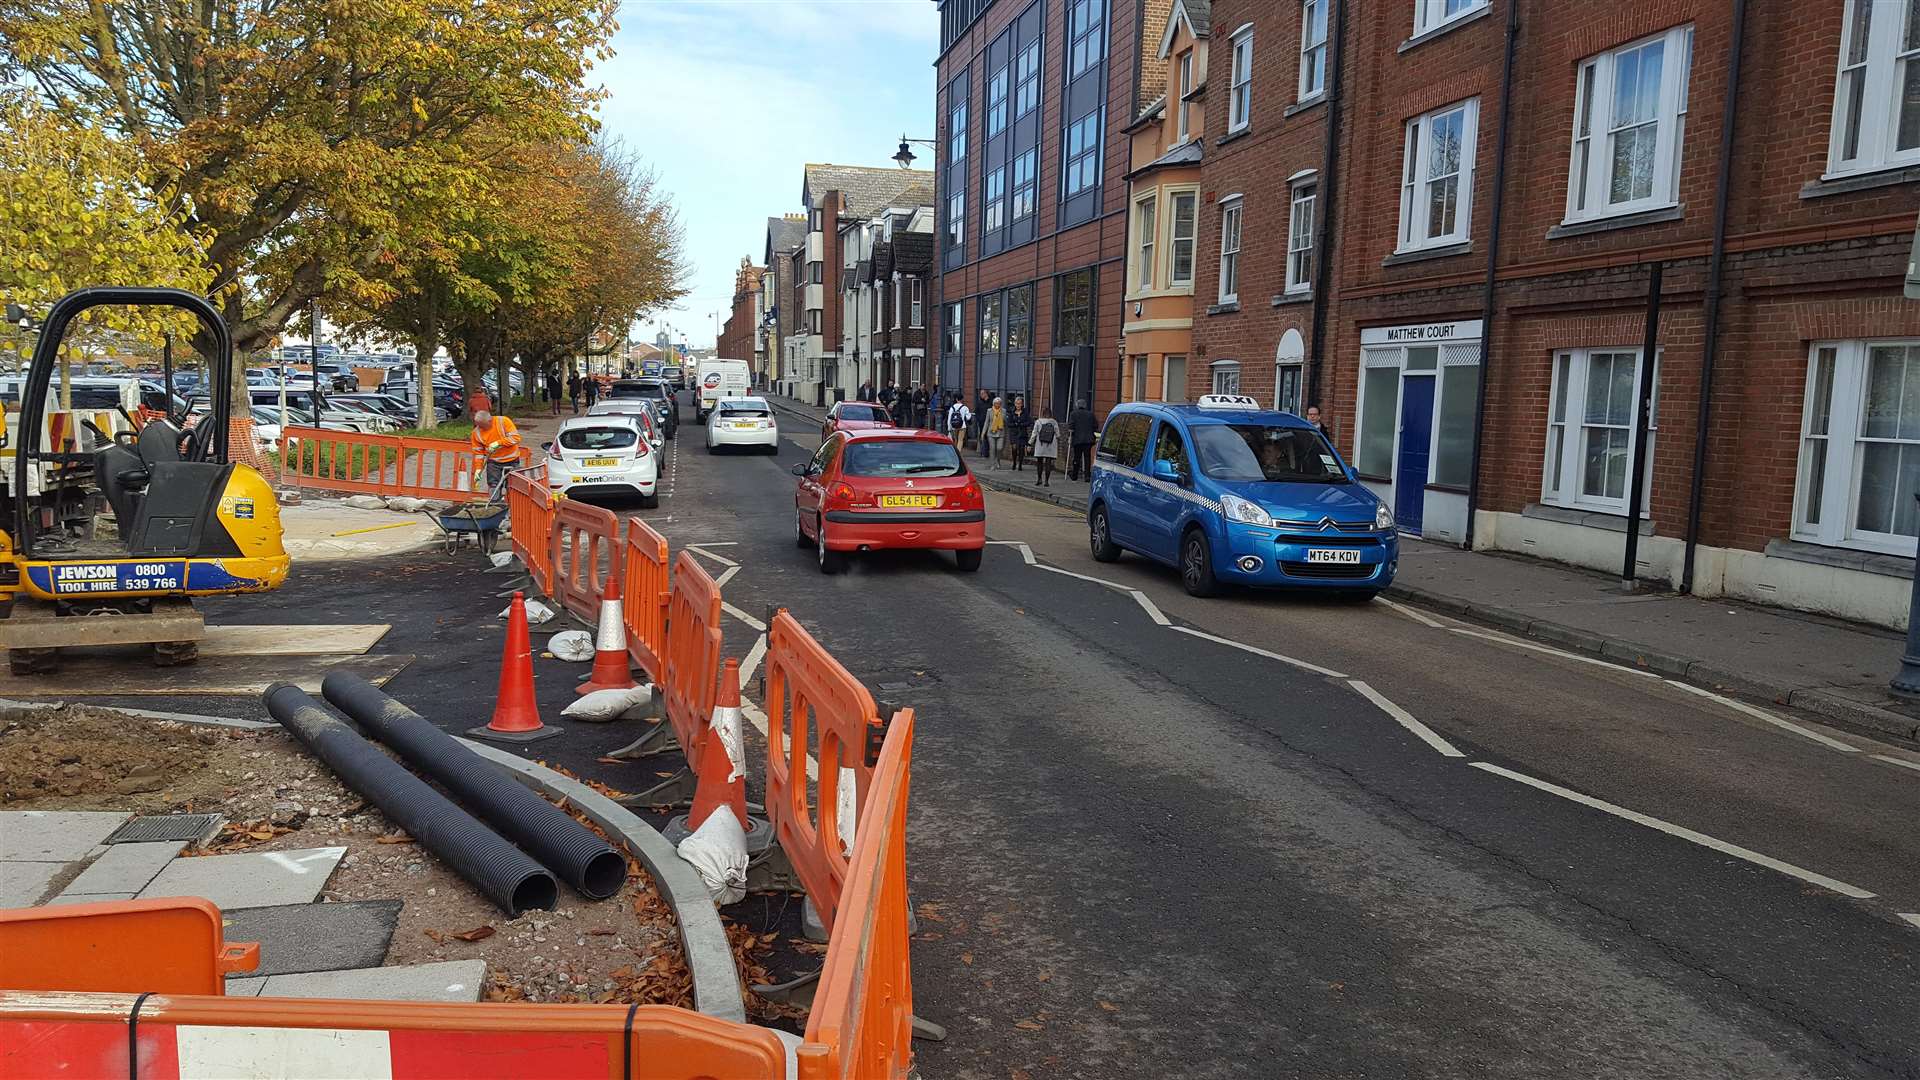 Station Road West will be closed for almost nine weeks